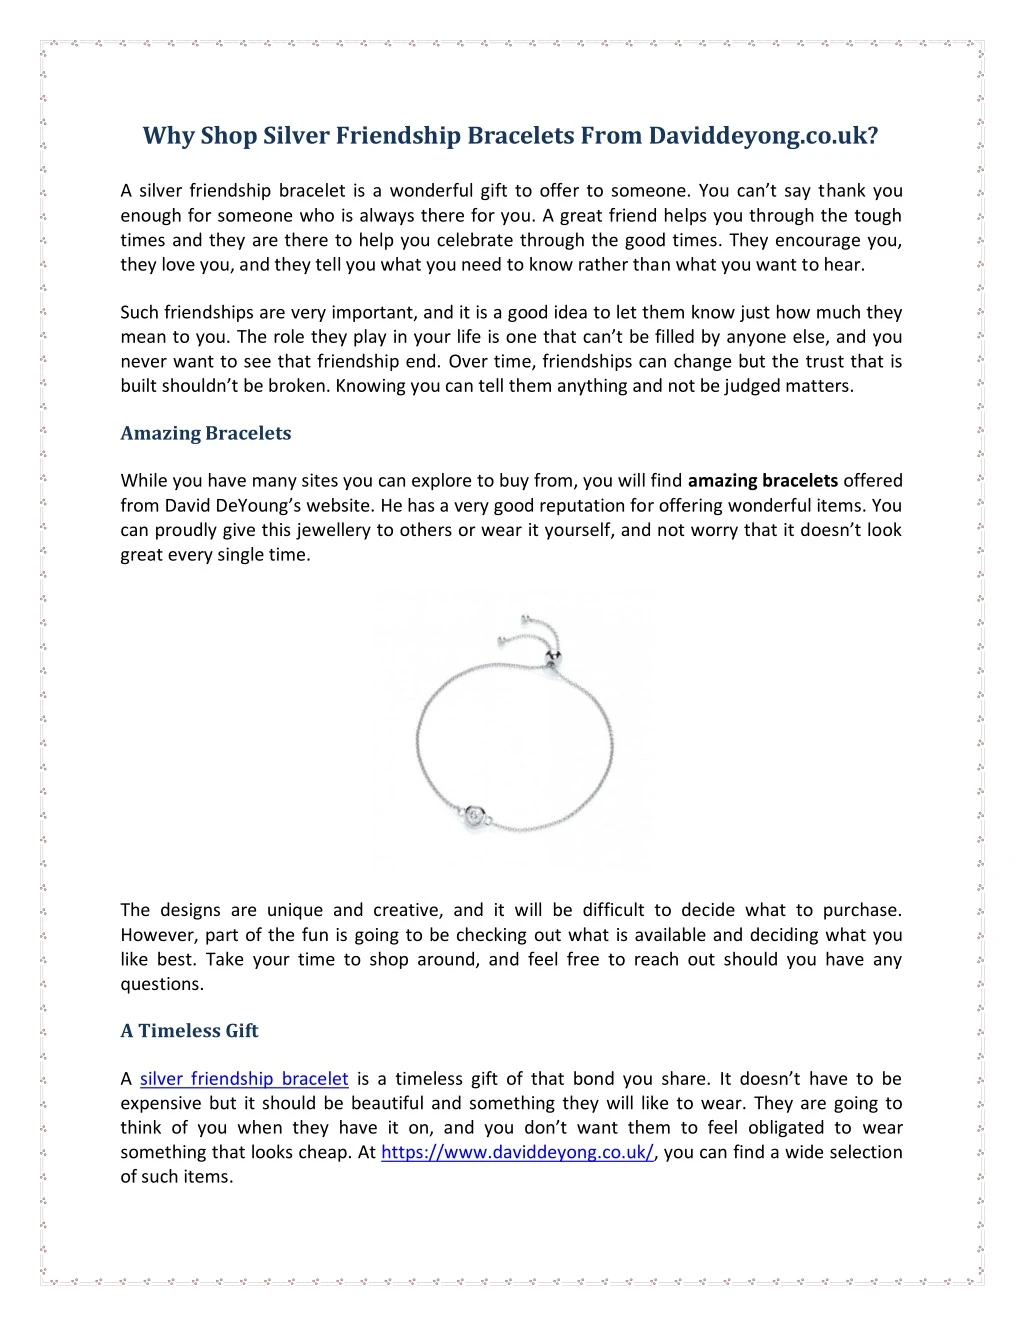 why shop silver friendship bracelets from n.